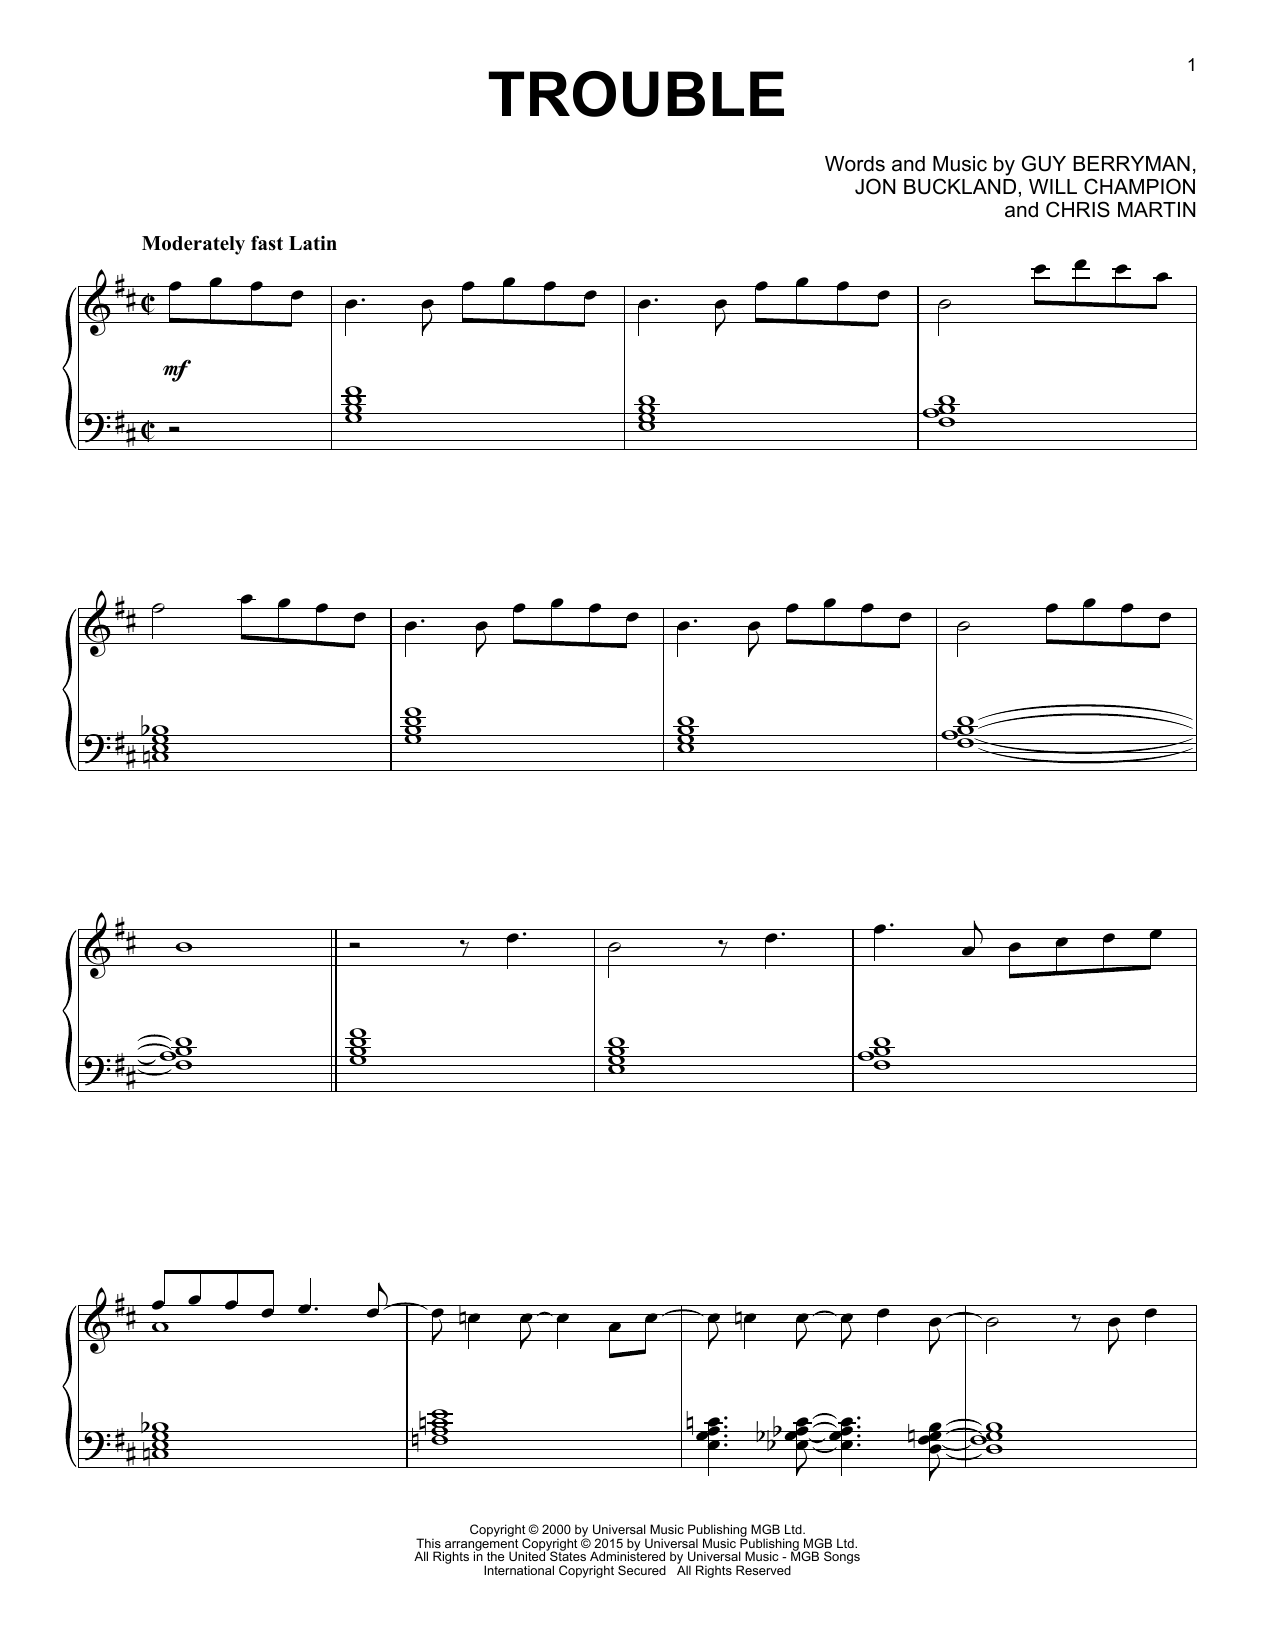 Coldplay "Trouble" Sheet Music Notes, Chords | Piano Download Jazz